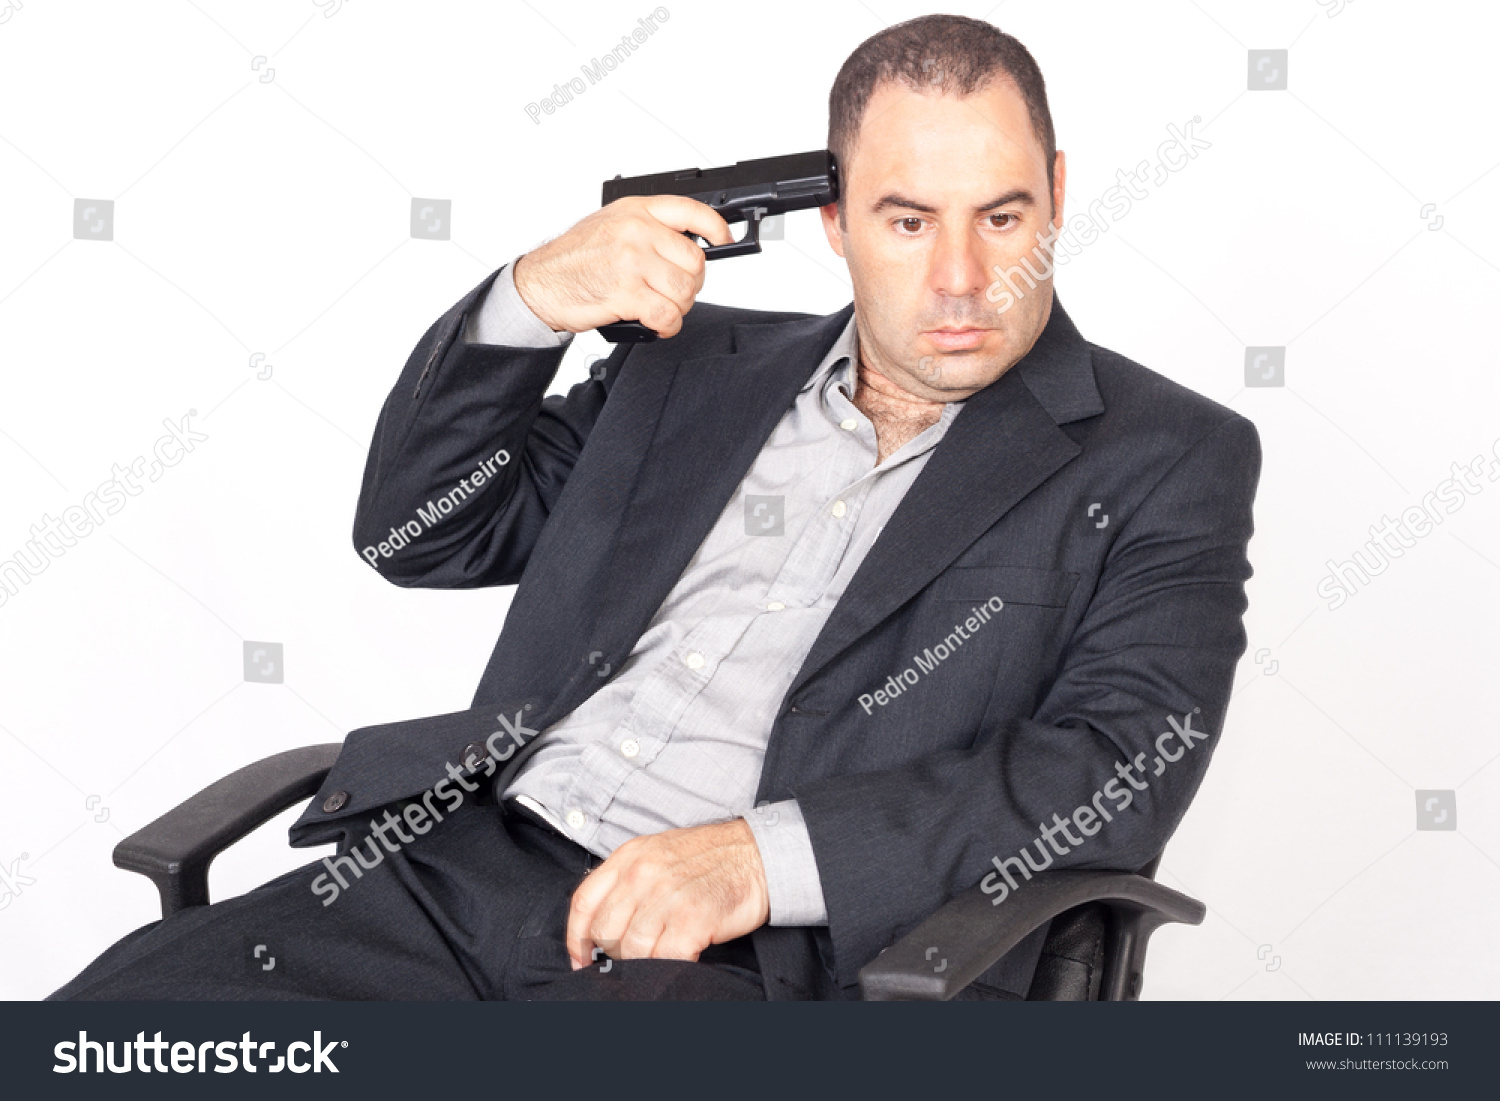 stock-photo-suicide-concept-man-pointing-a-gun-at-his-head-white-background-111139193.jpg